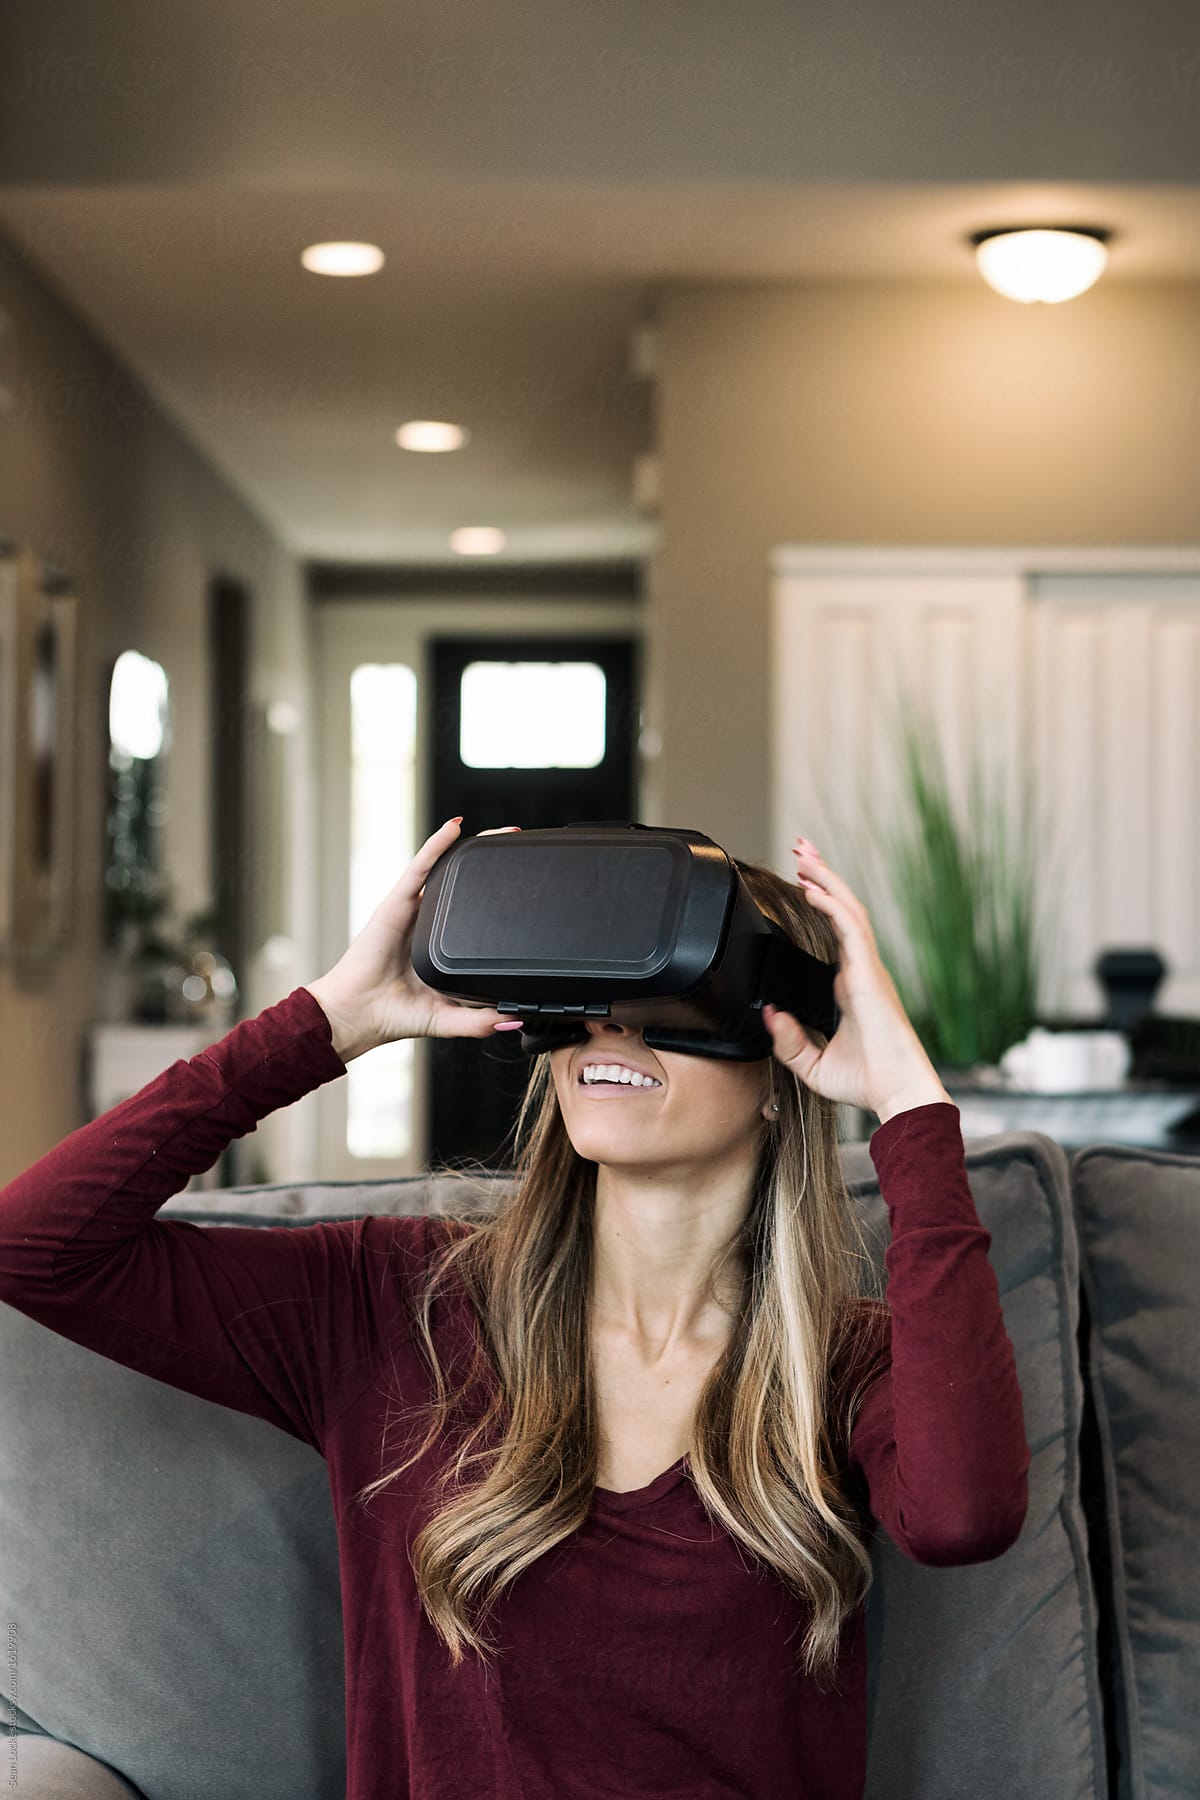 Home: Girl Puts On And Has Fun With VR Headset